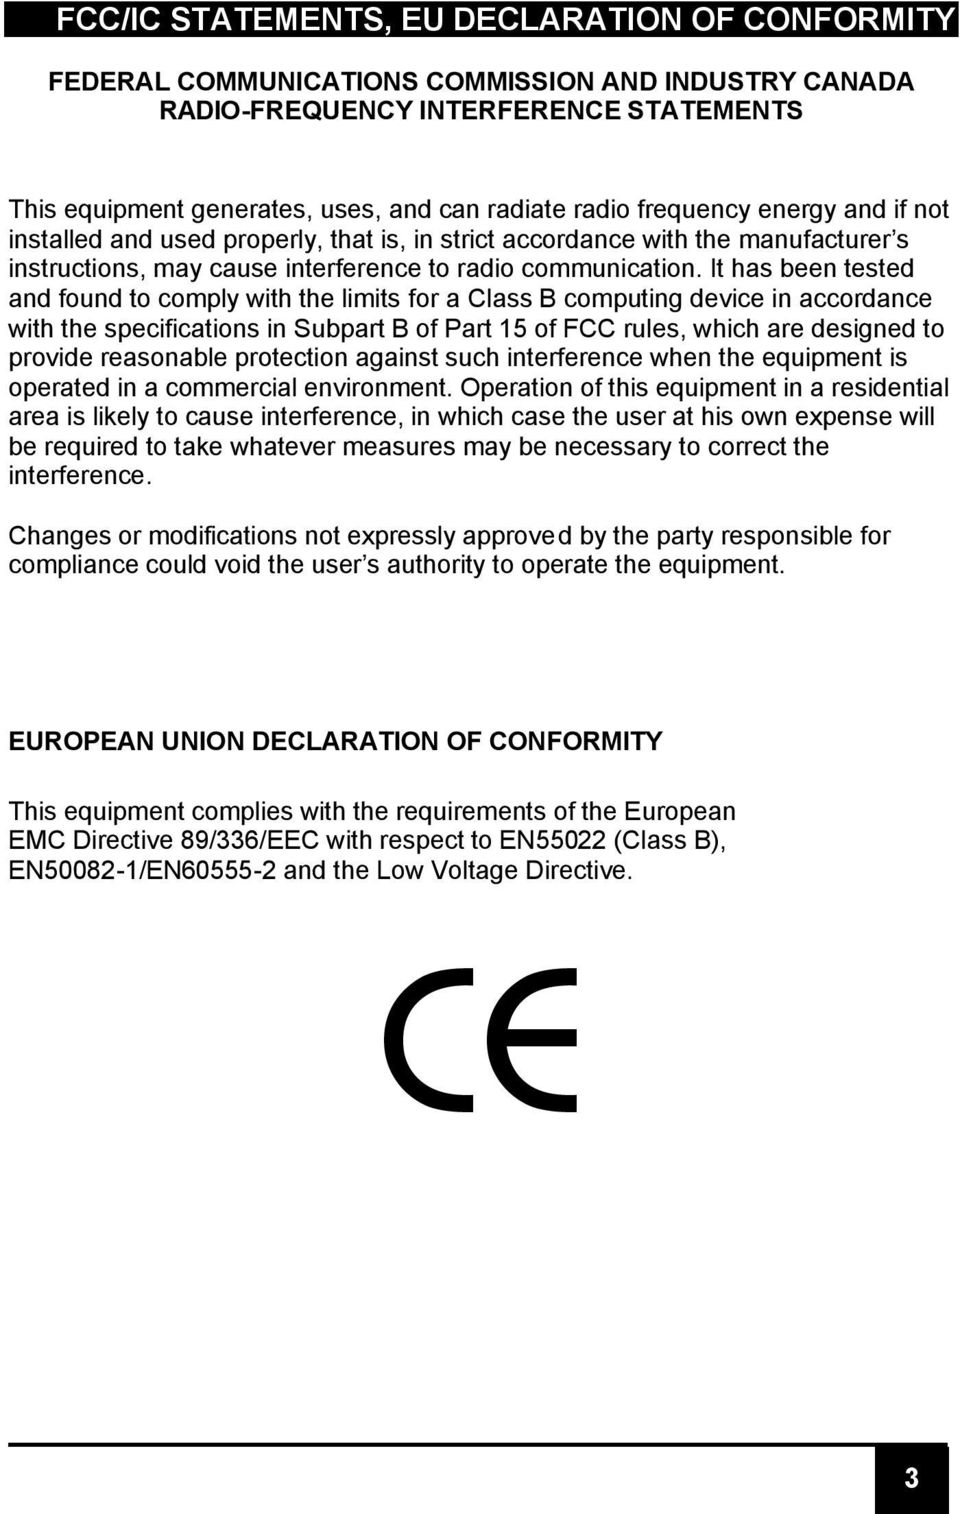 It has been tested and found to comply with the limits for a Class B computing device in accordance with the specifications in Subpart B of Part 15 of FCC rules, which are designed to provide